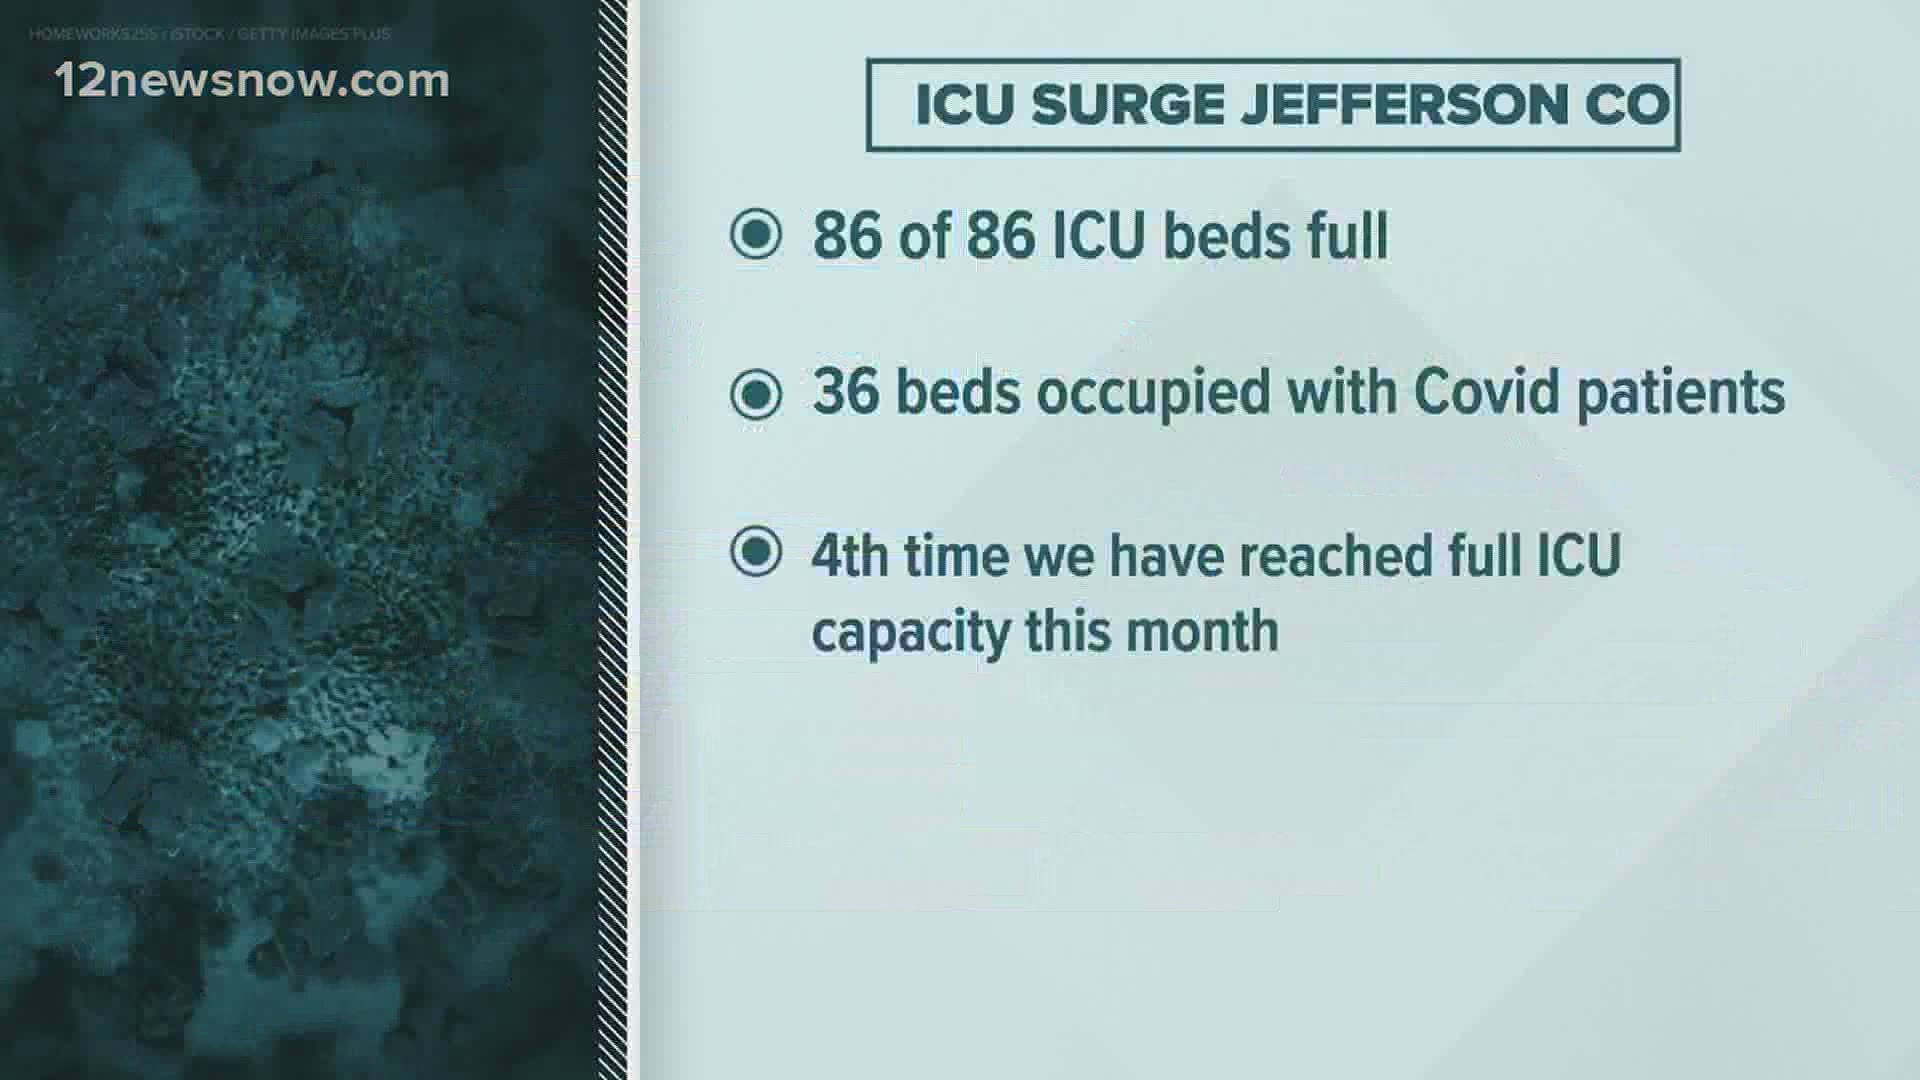 All of Jefferson County's 86 ICU beds are currently full